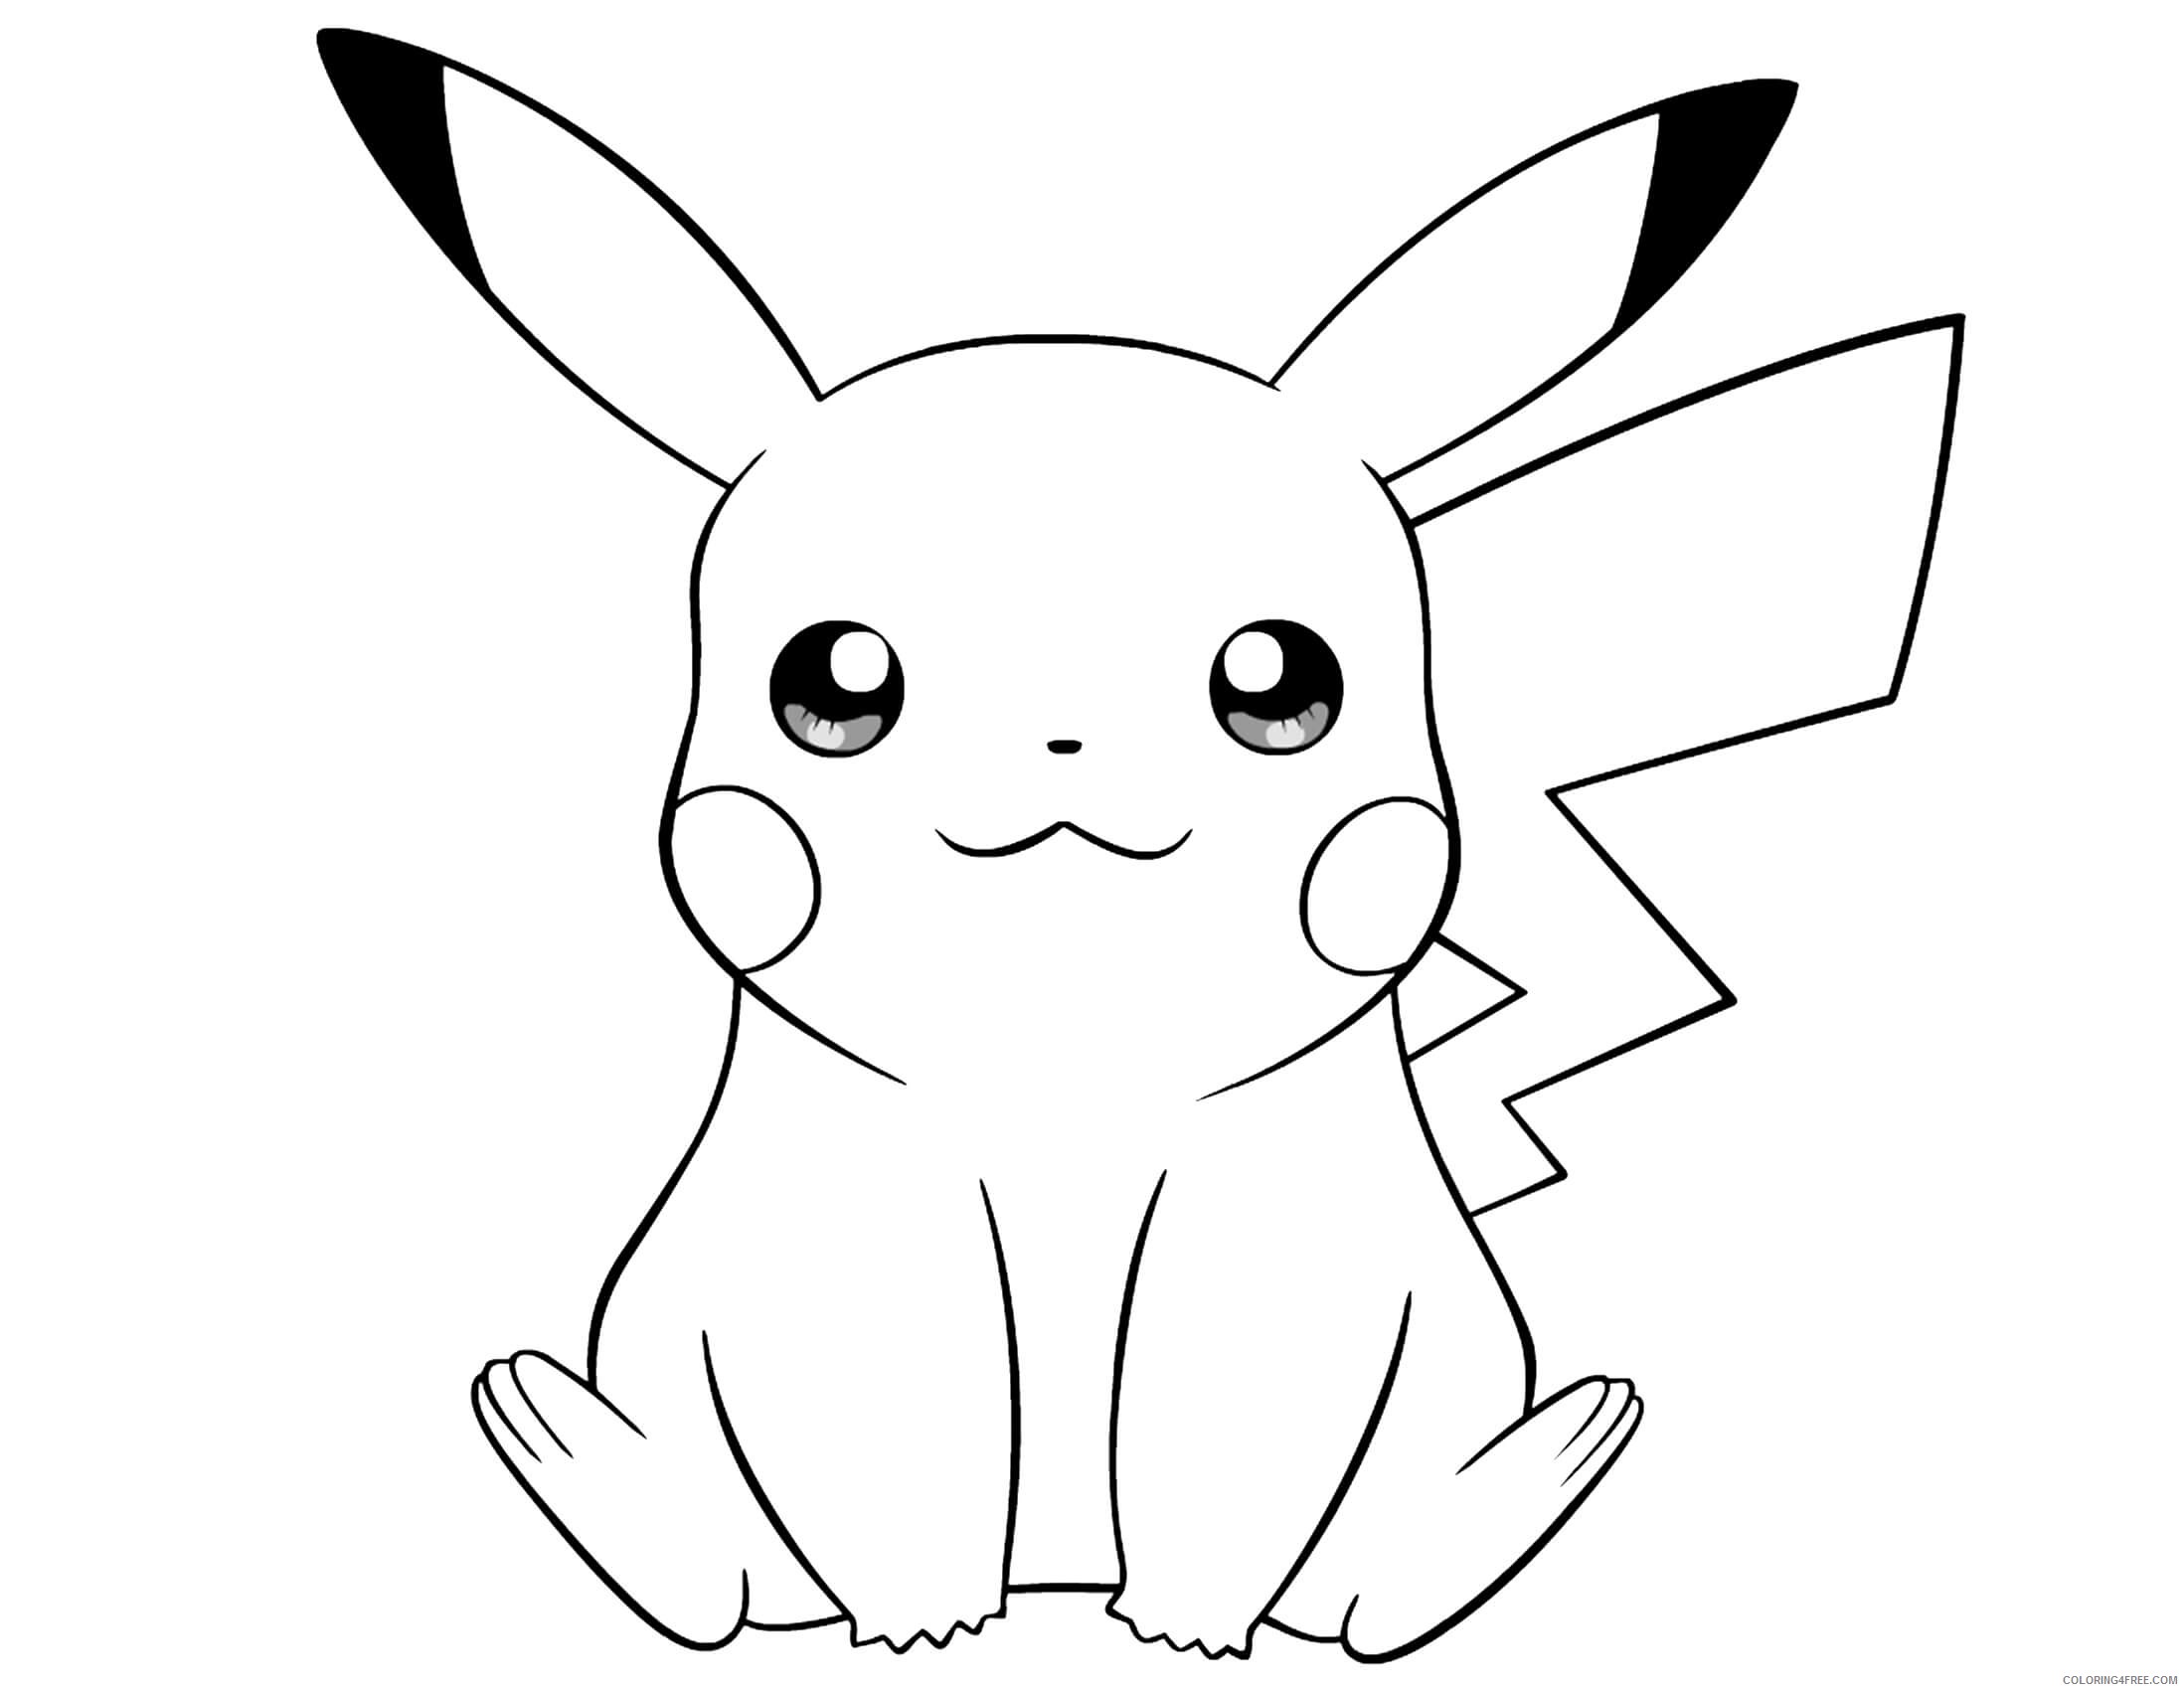 pikachu-coloring-pages-cute-coloring4free-coloring4free